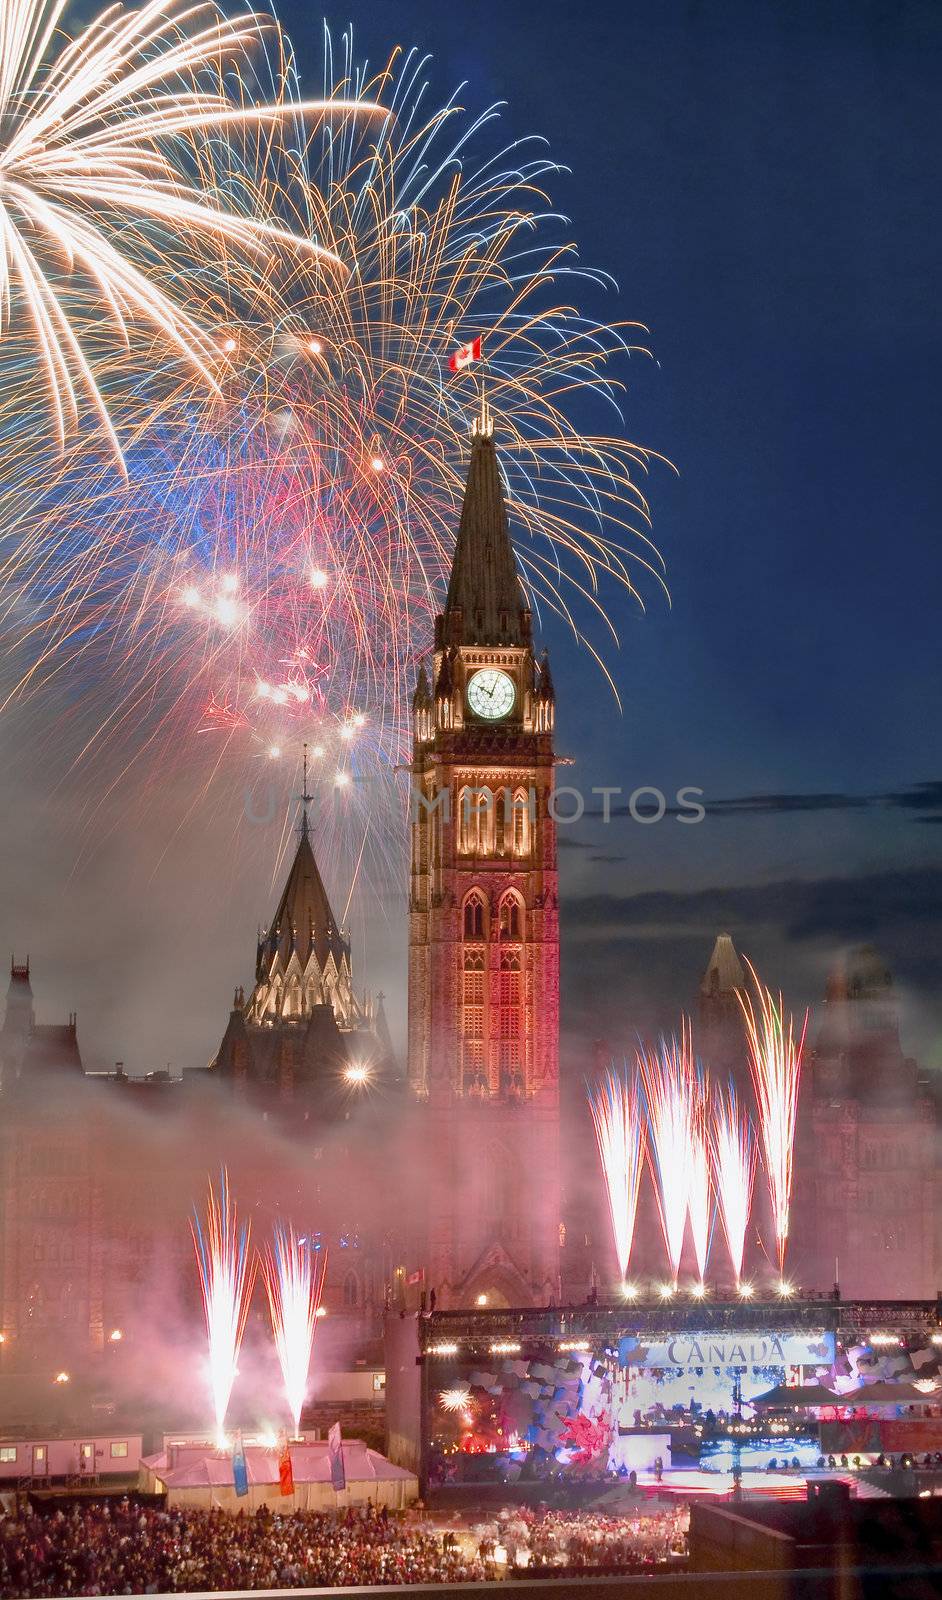 The canadian Parliament during the fireworks display on Canada Day in July.